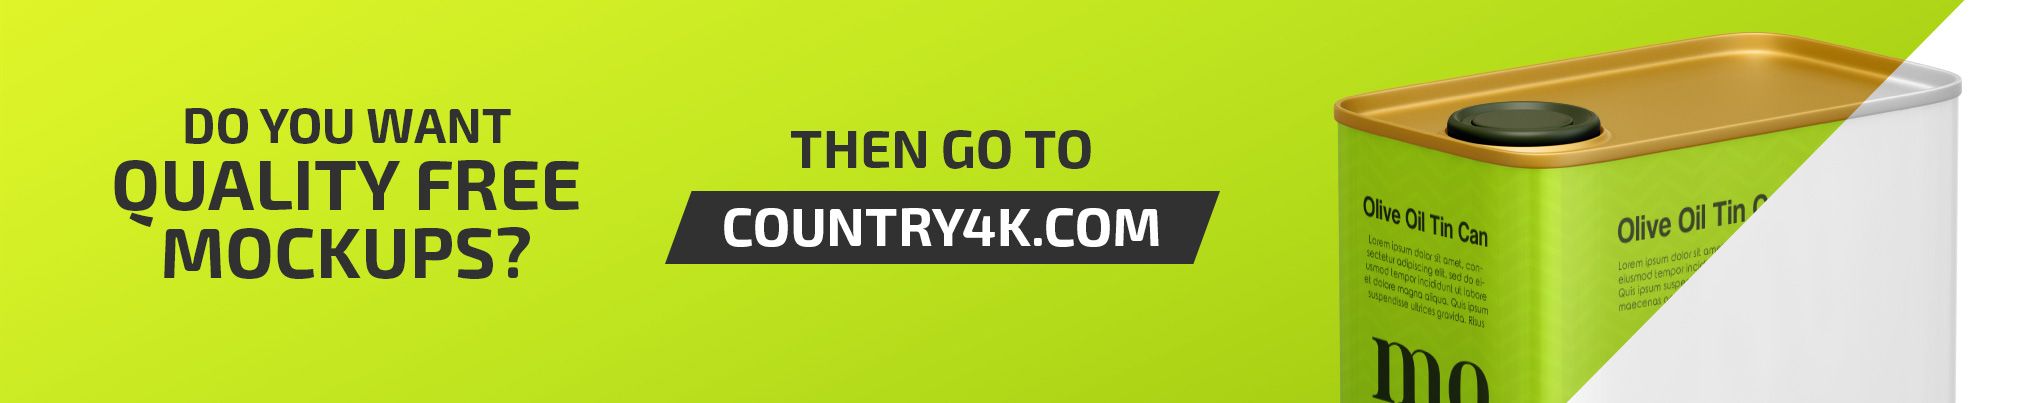 country4k